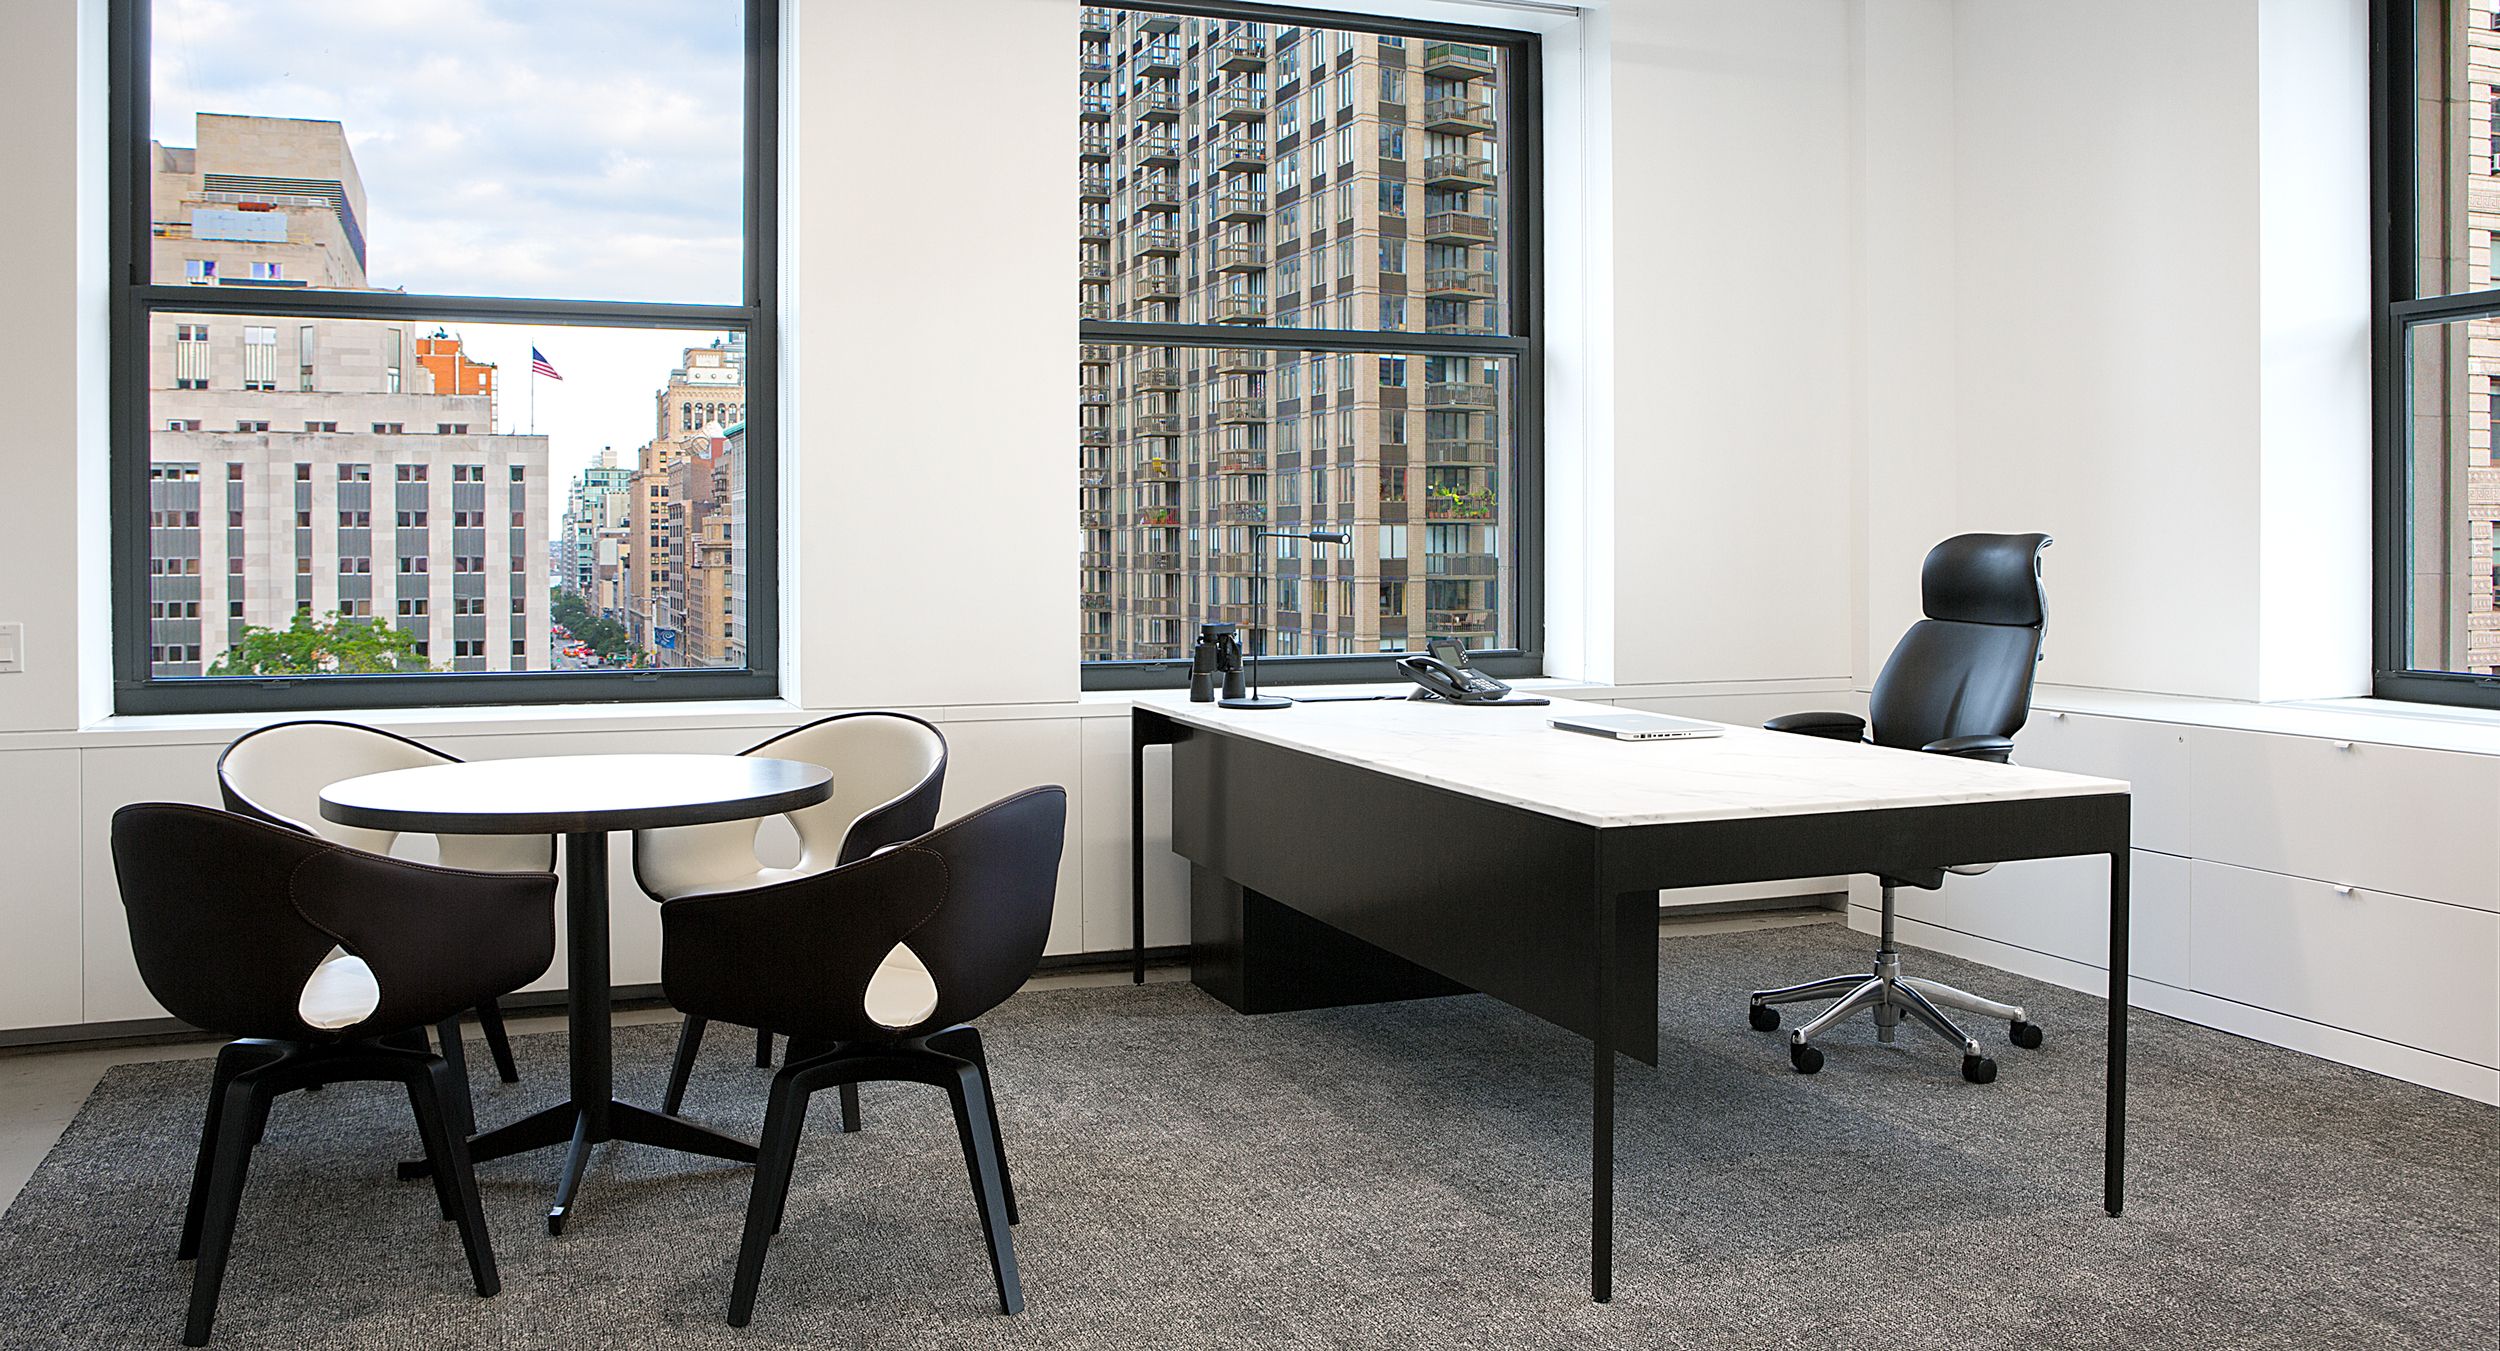 IMG's private offices feature custom desks with white Corian or glass paired with bronze table legs.